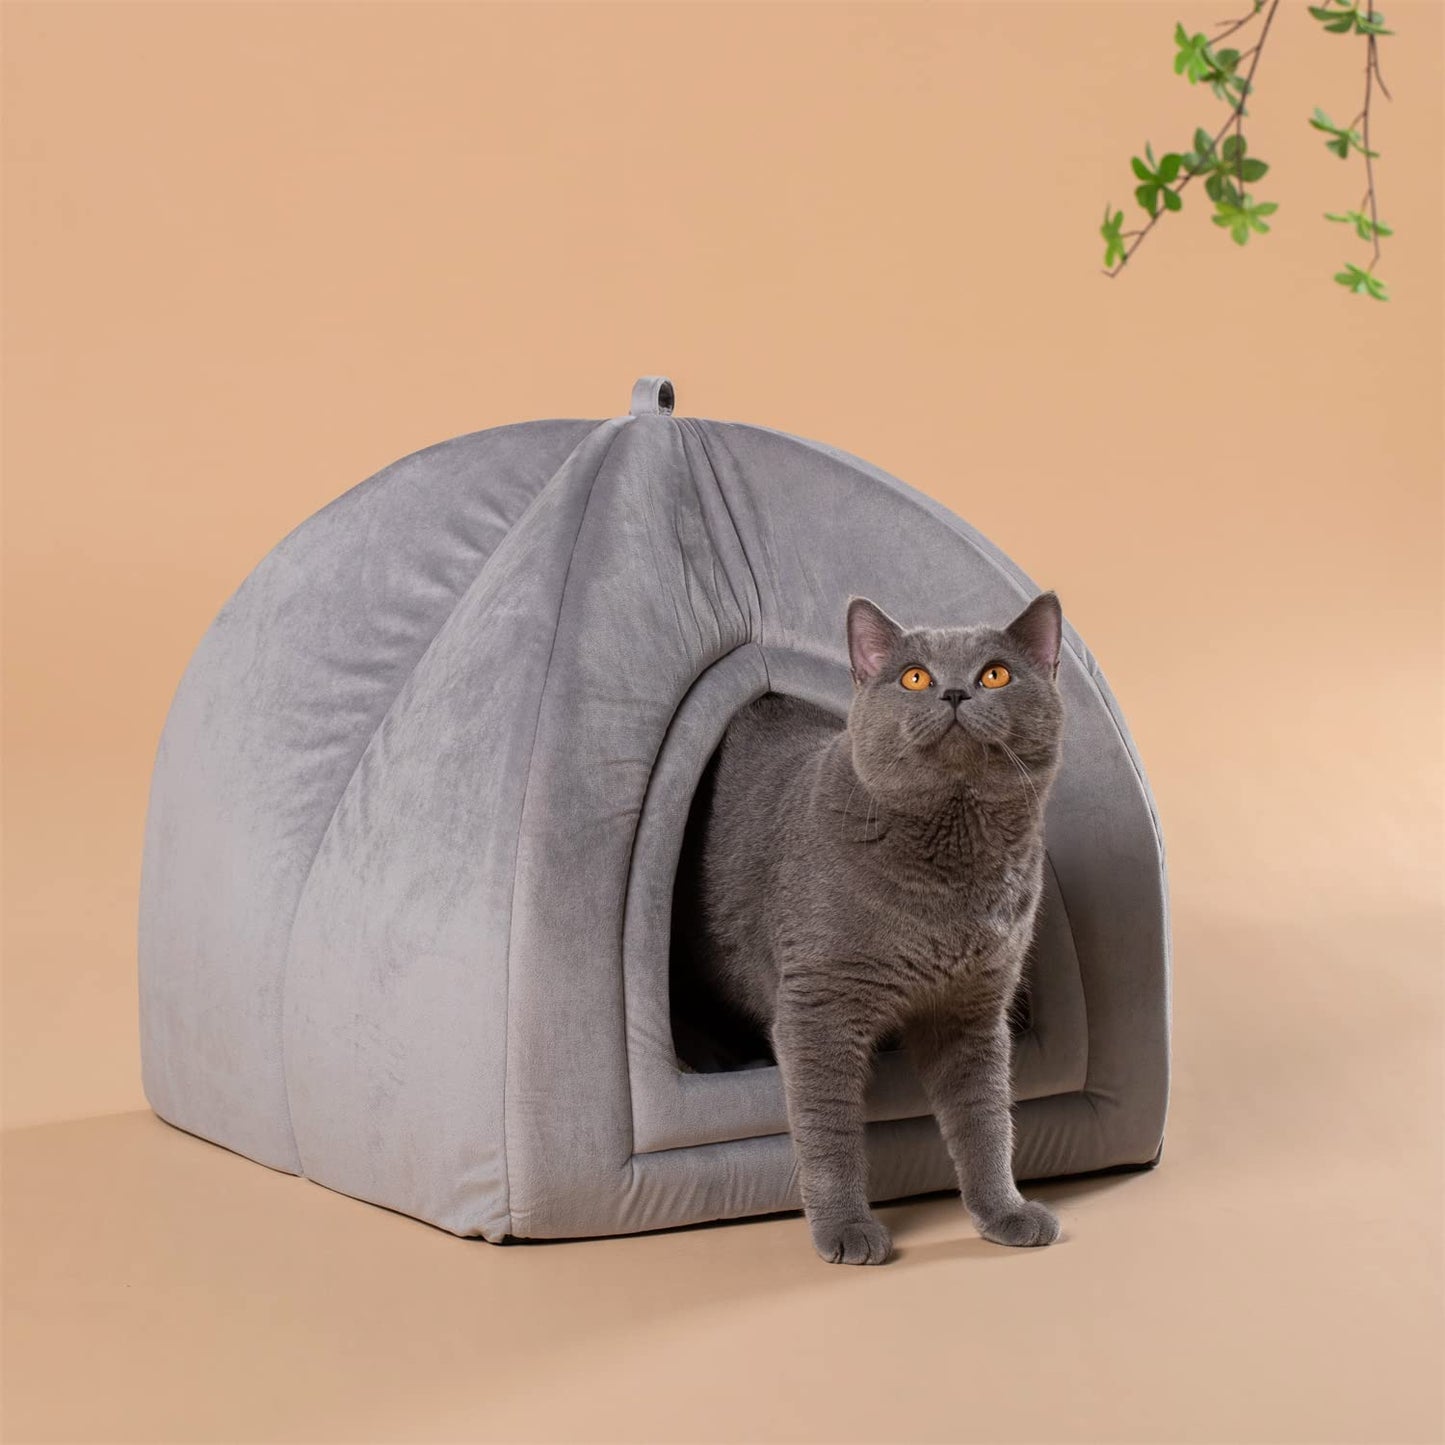 KASENTEX Cat Bed for Indoor Cats, 2-in-1 Cat House Pet Supplies for Large Cat or Small Dog - Animal Cave, Cat Tent with Removable Washable Pillow Cushion